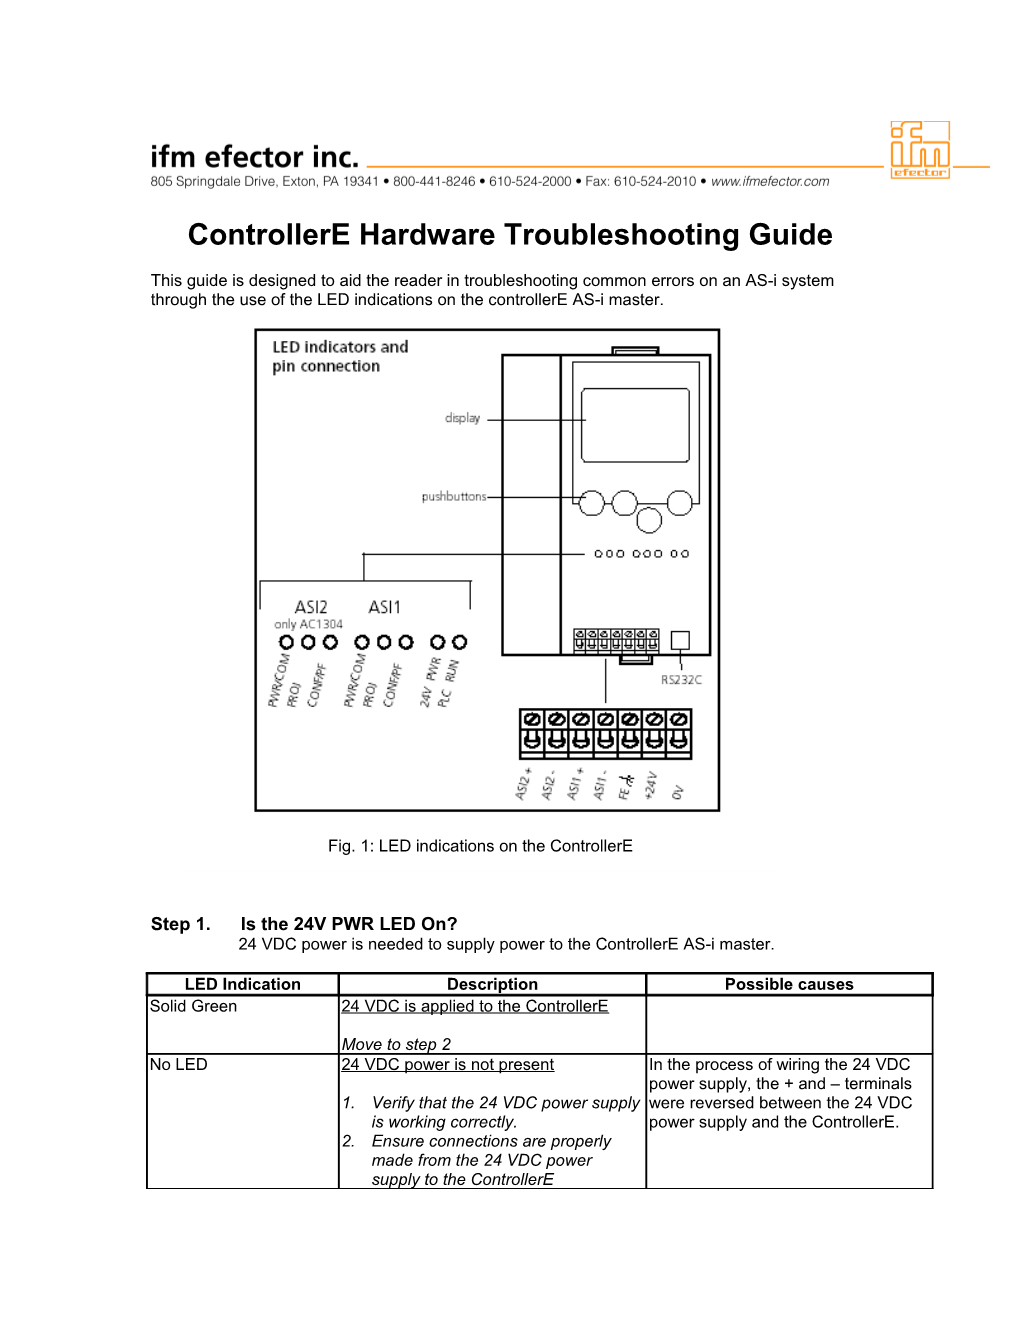 Controllere Hardware Troubleshooting Guide